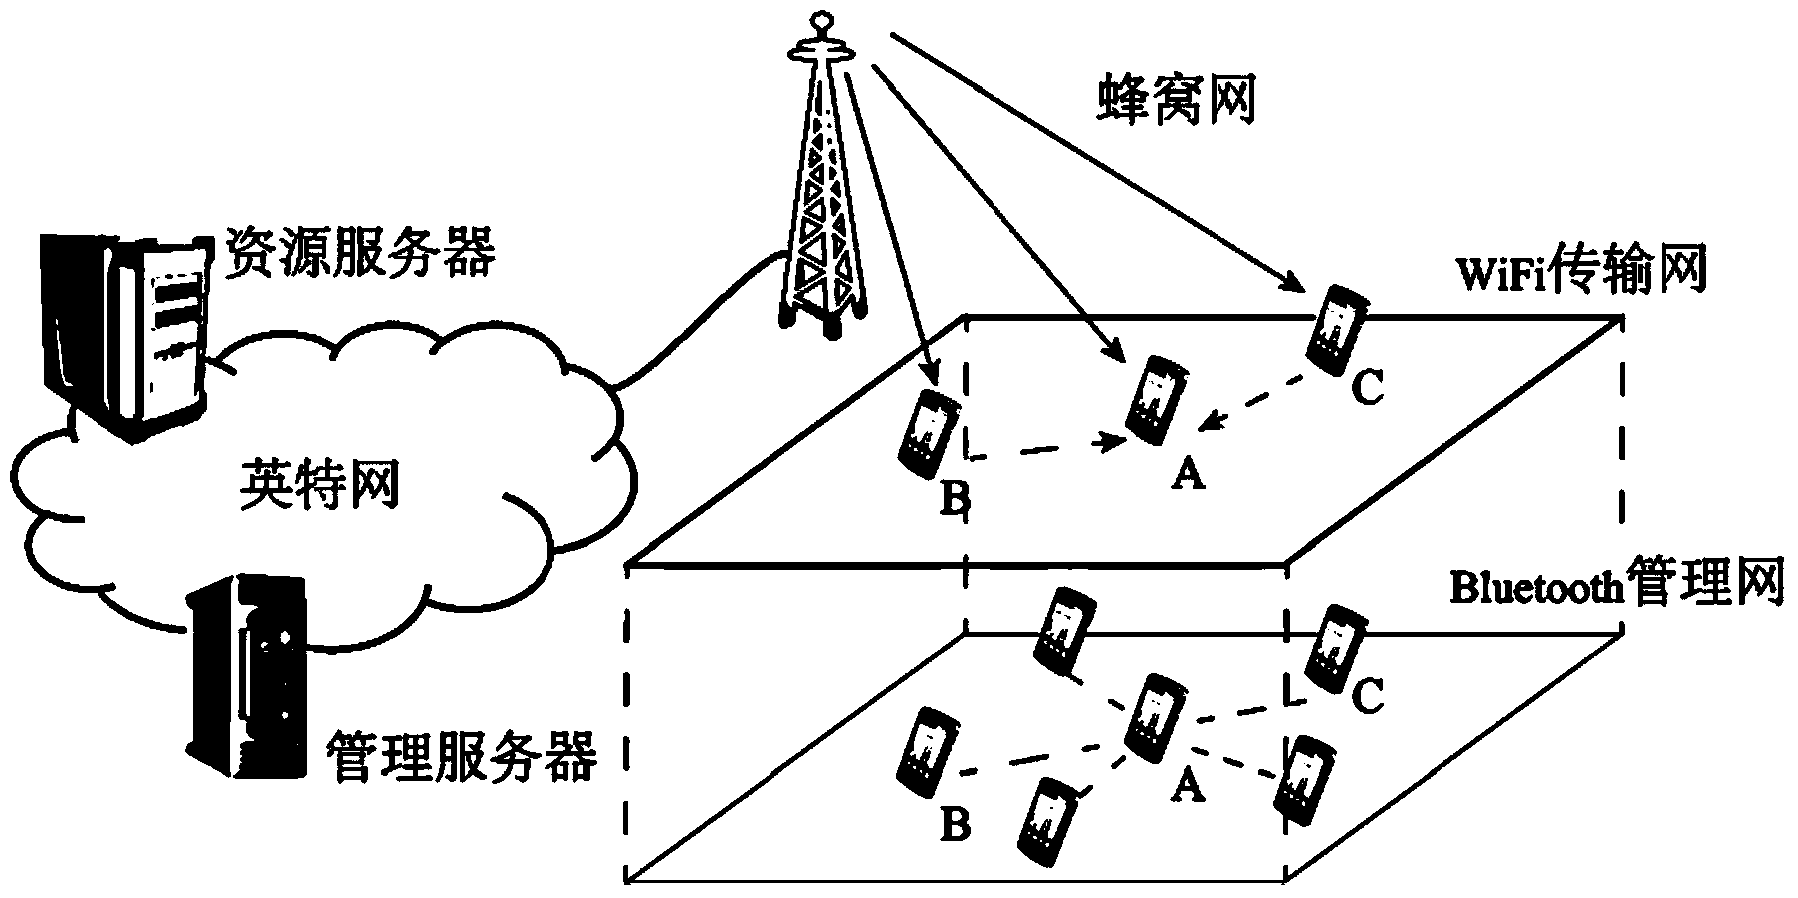 Mobile terminal cooperation download method based on self-organizing network